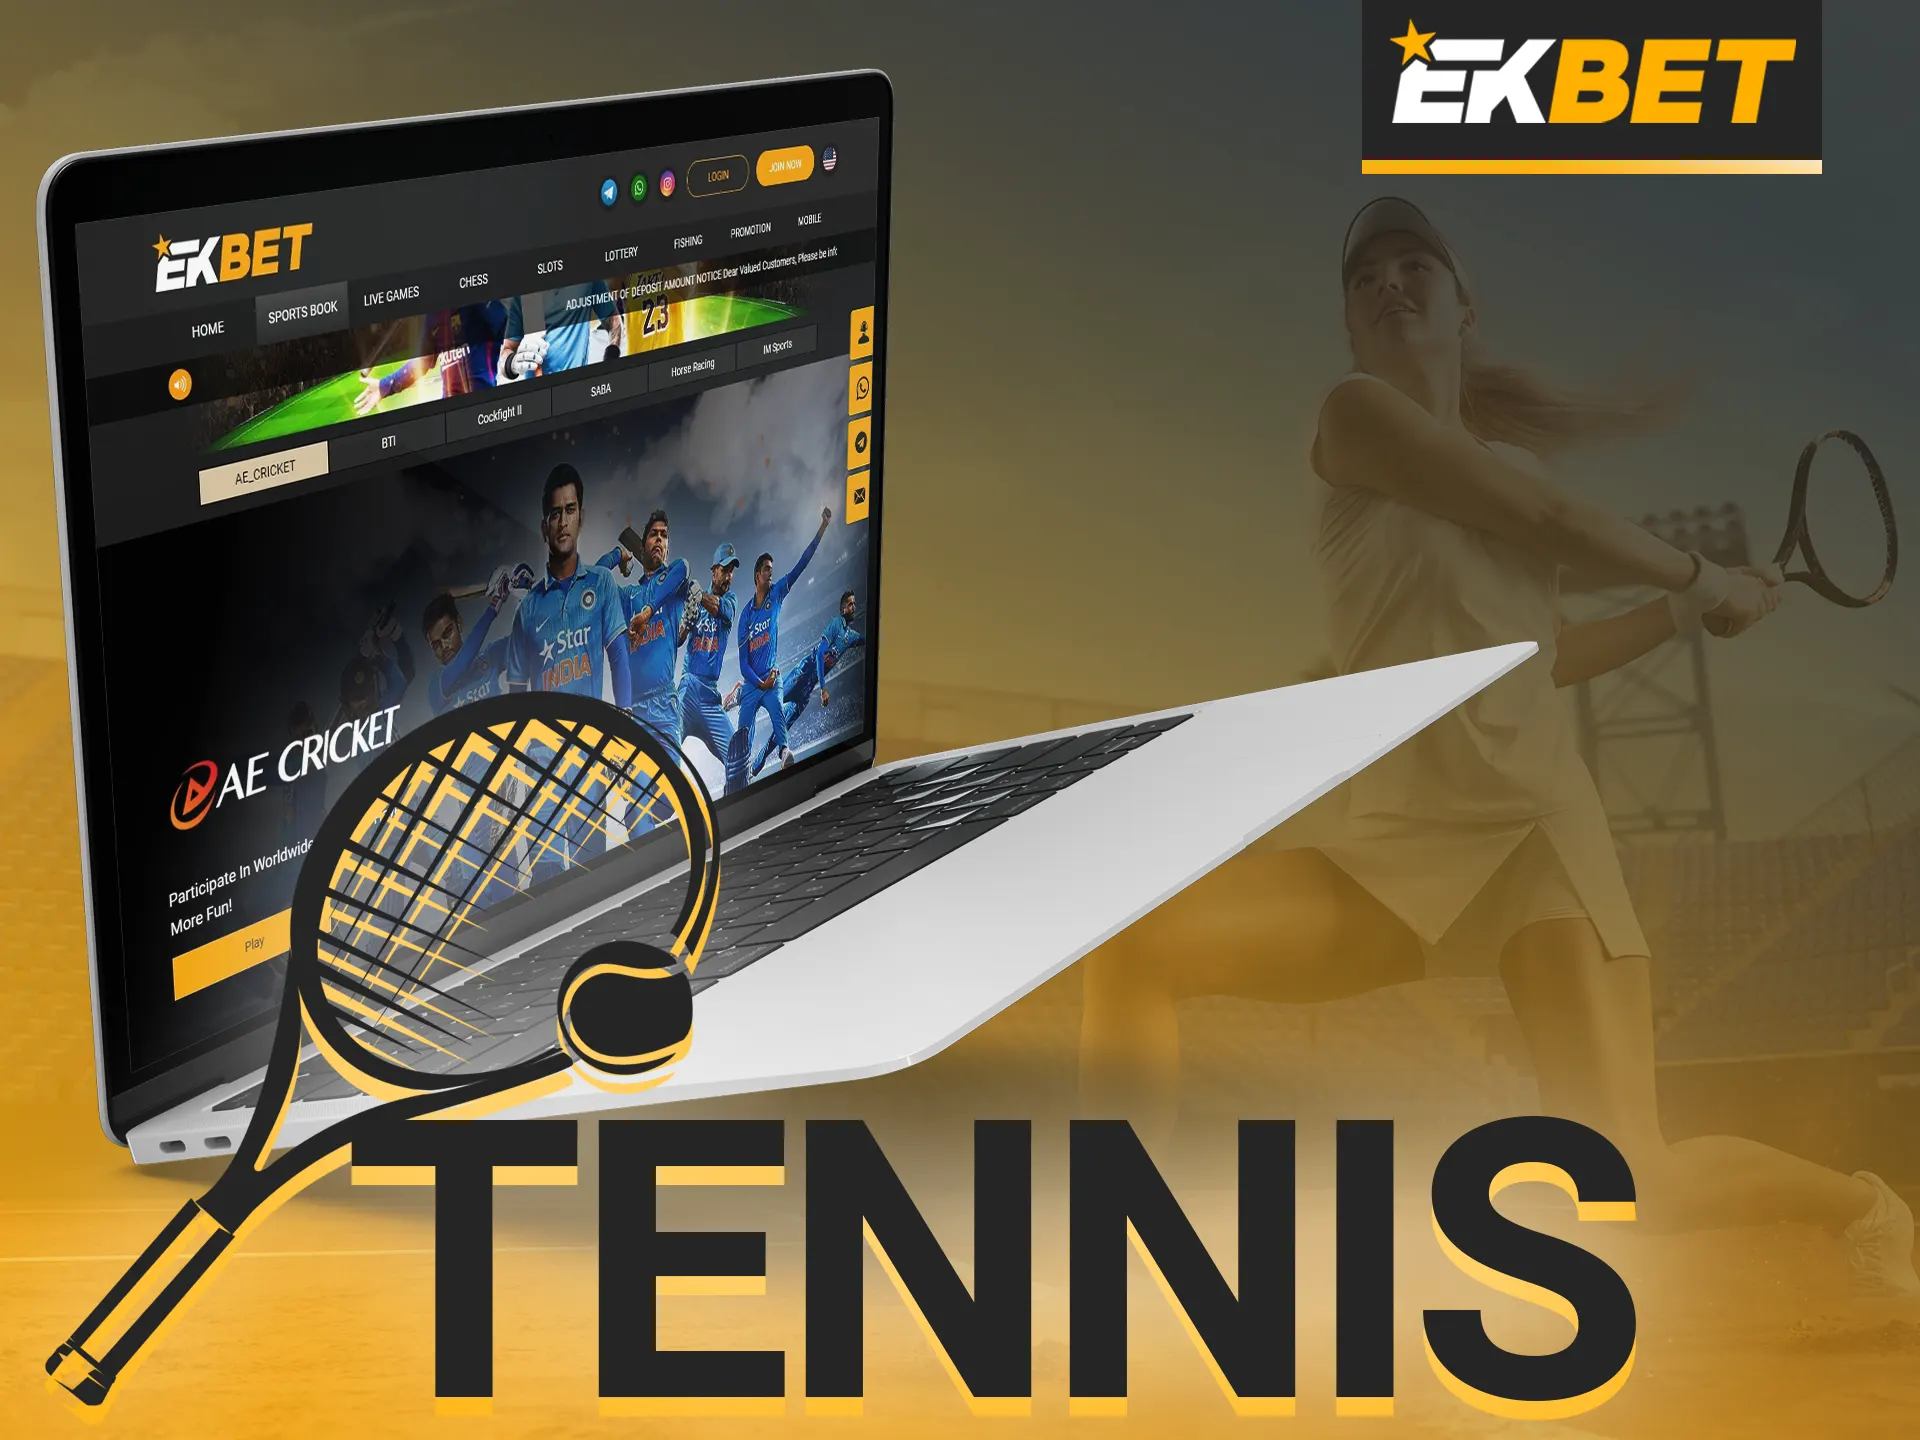 On EKbet place your bet on tennis.